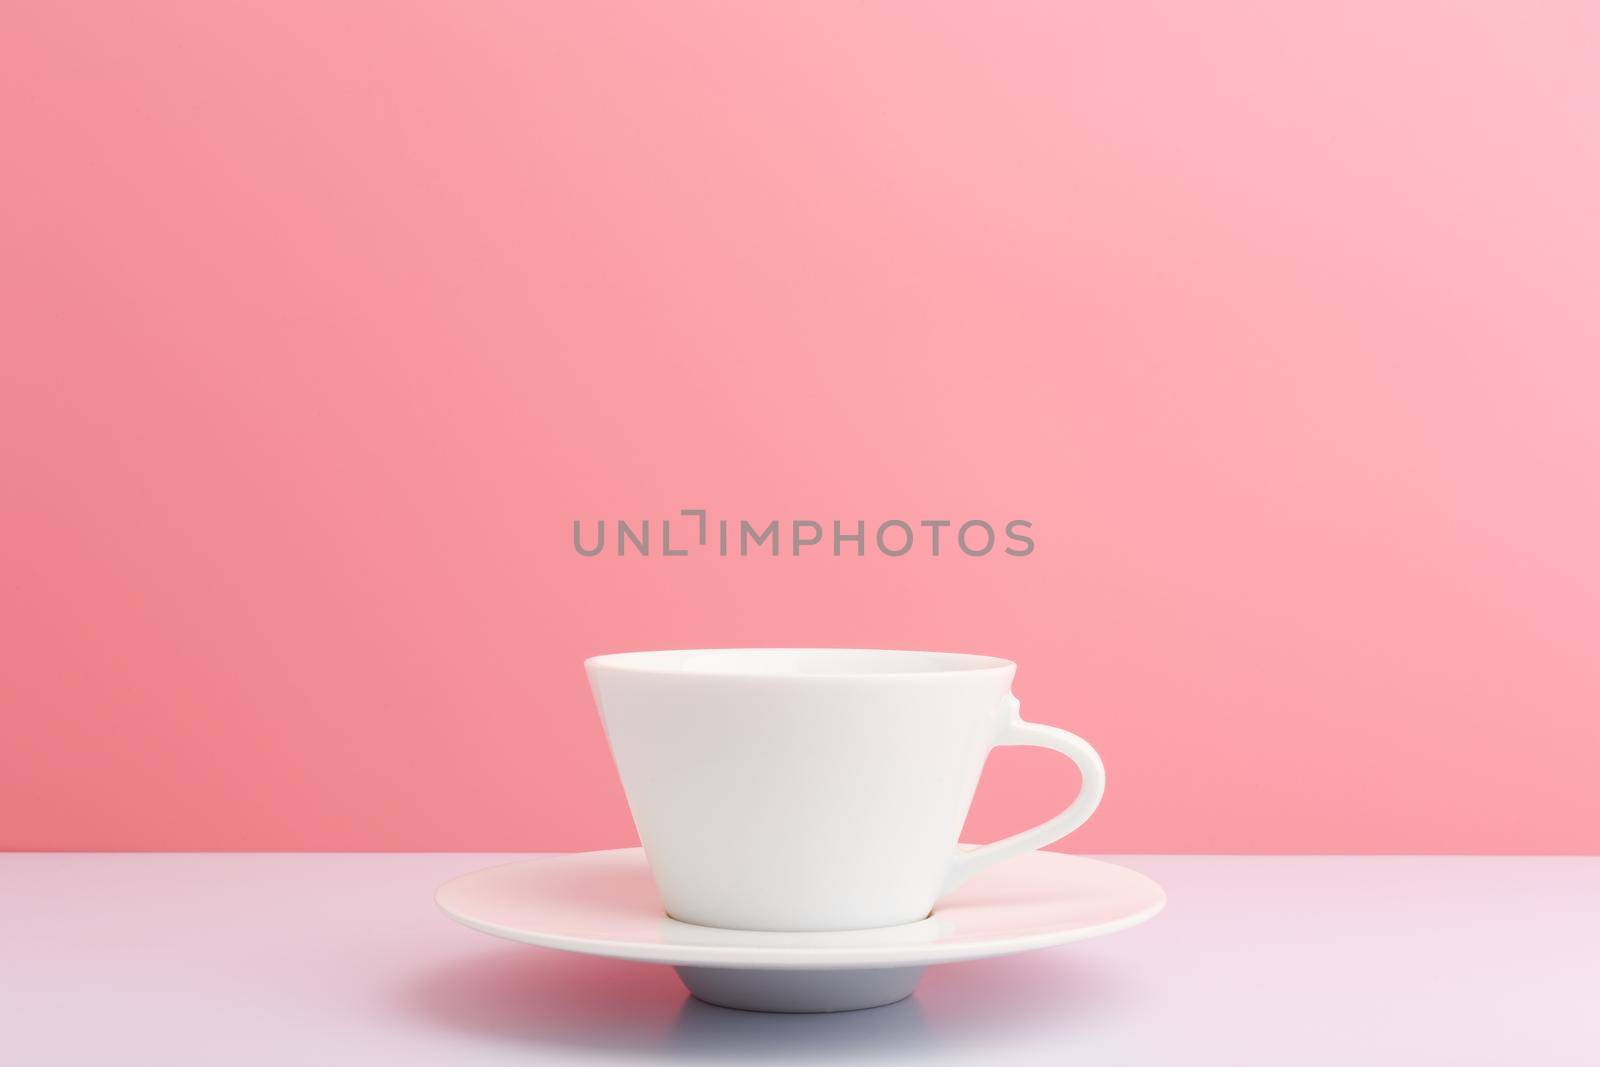 White ceramic coffee cup with saucer on white table against light pink background with copy space by Senorina_Irina